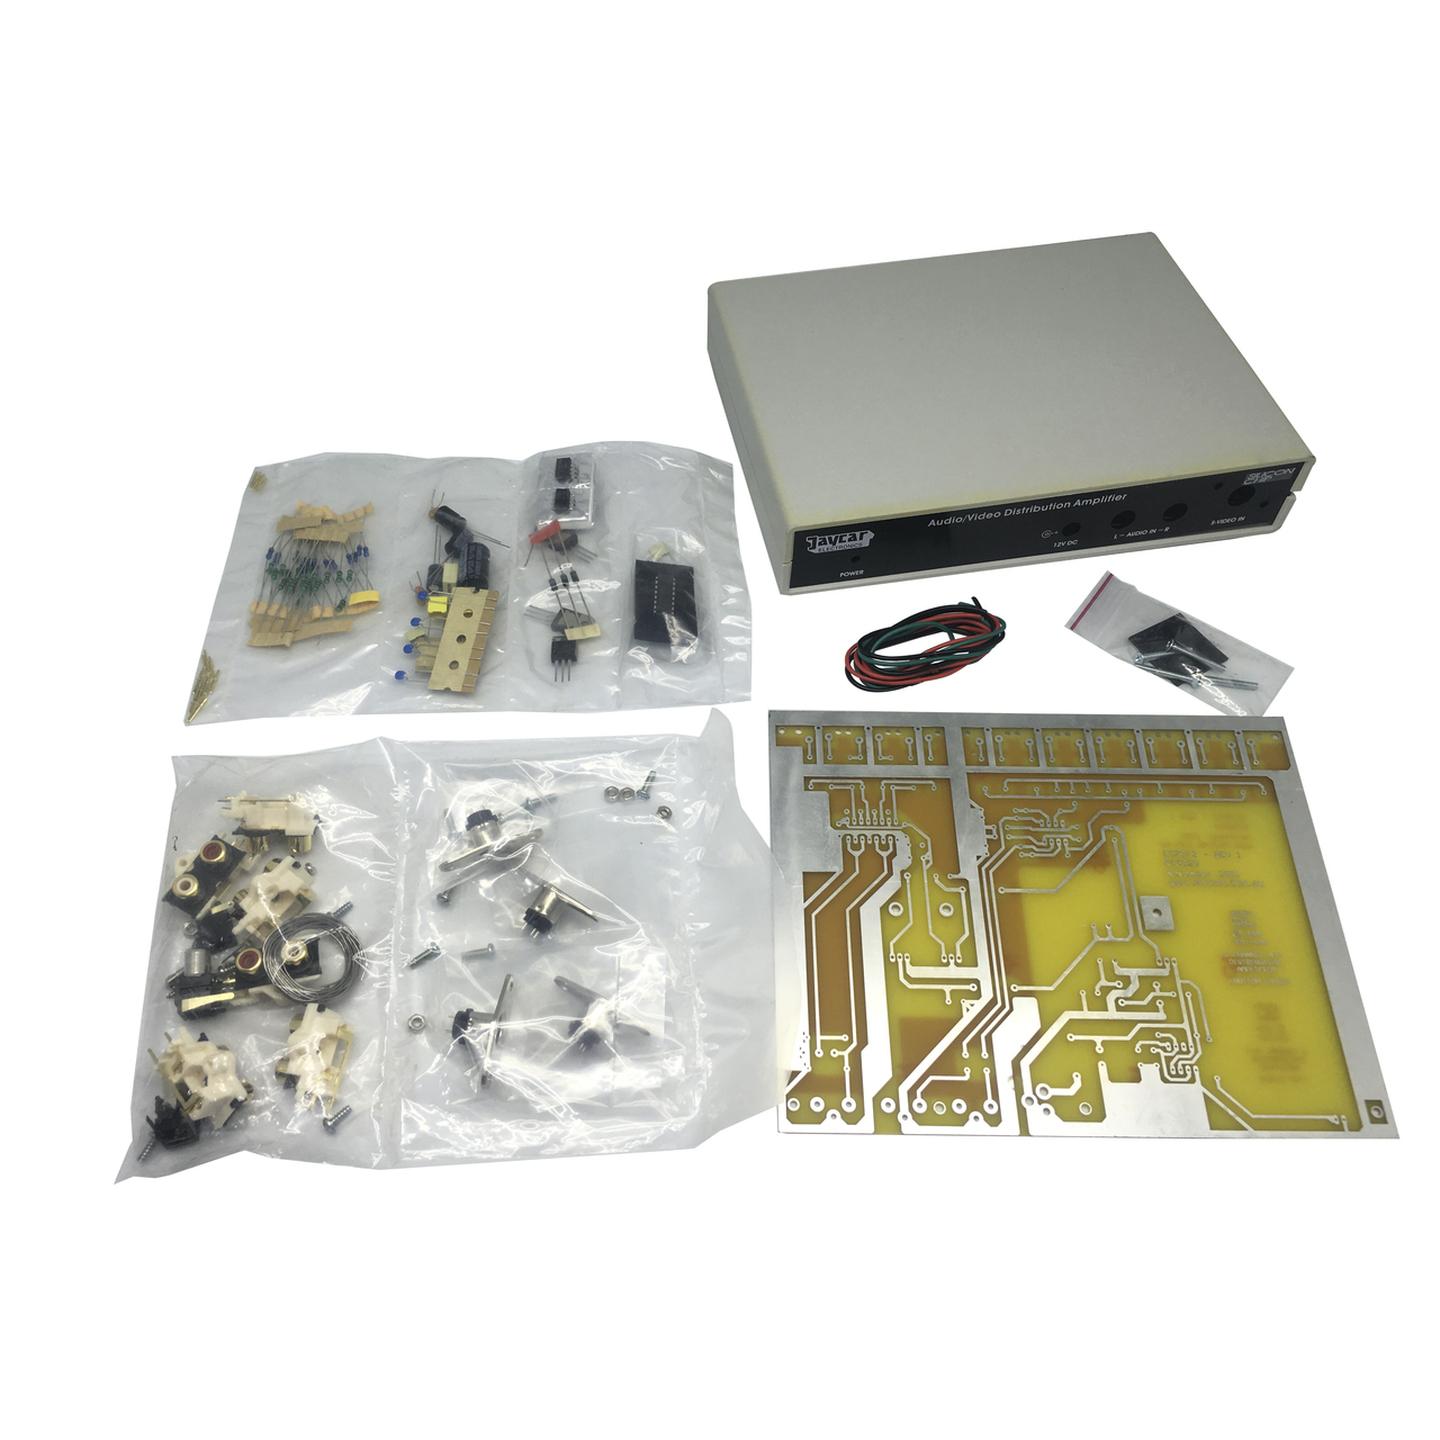 Low Cost S-Video/Audio Distribution Amplifier Kit Back Catalogue